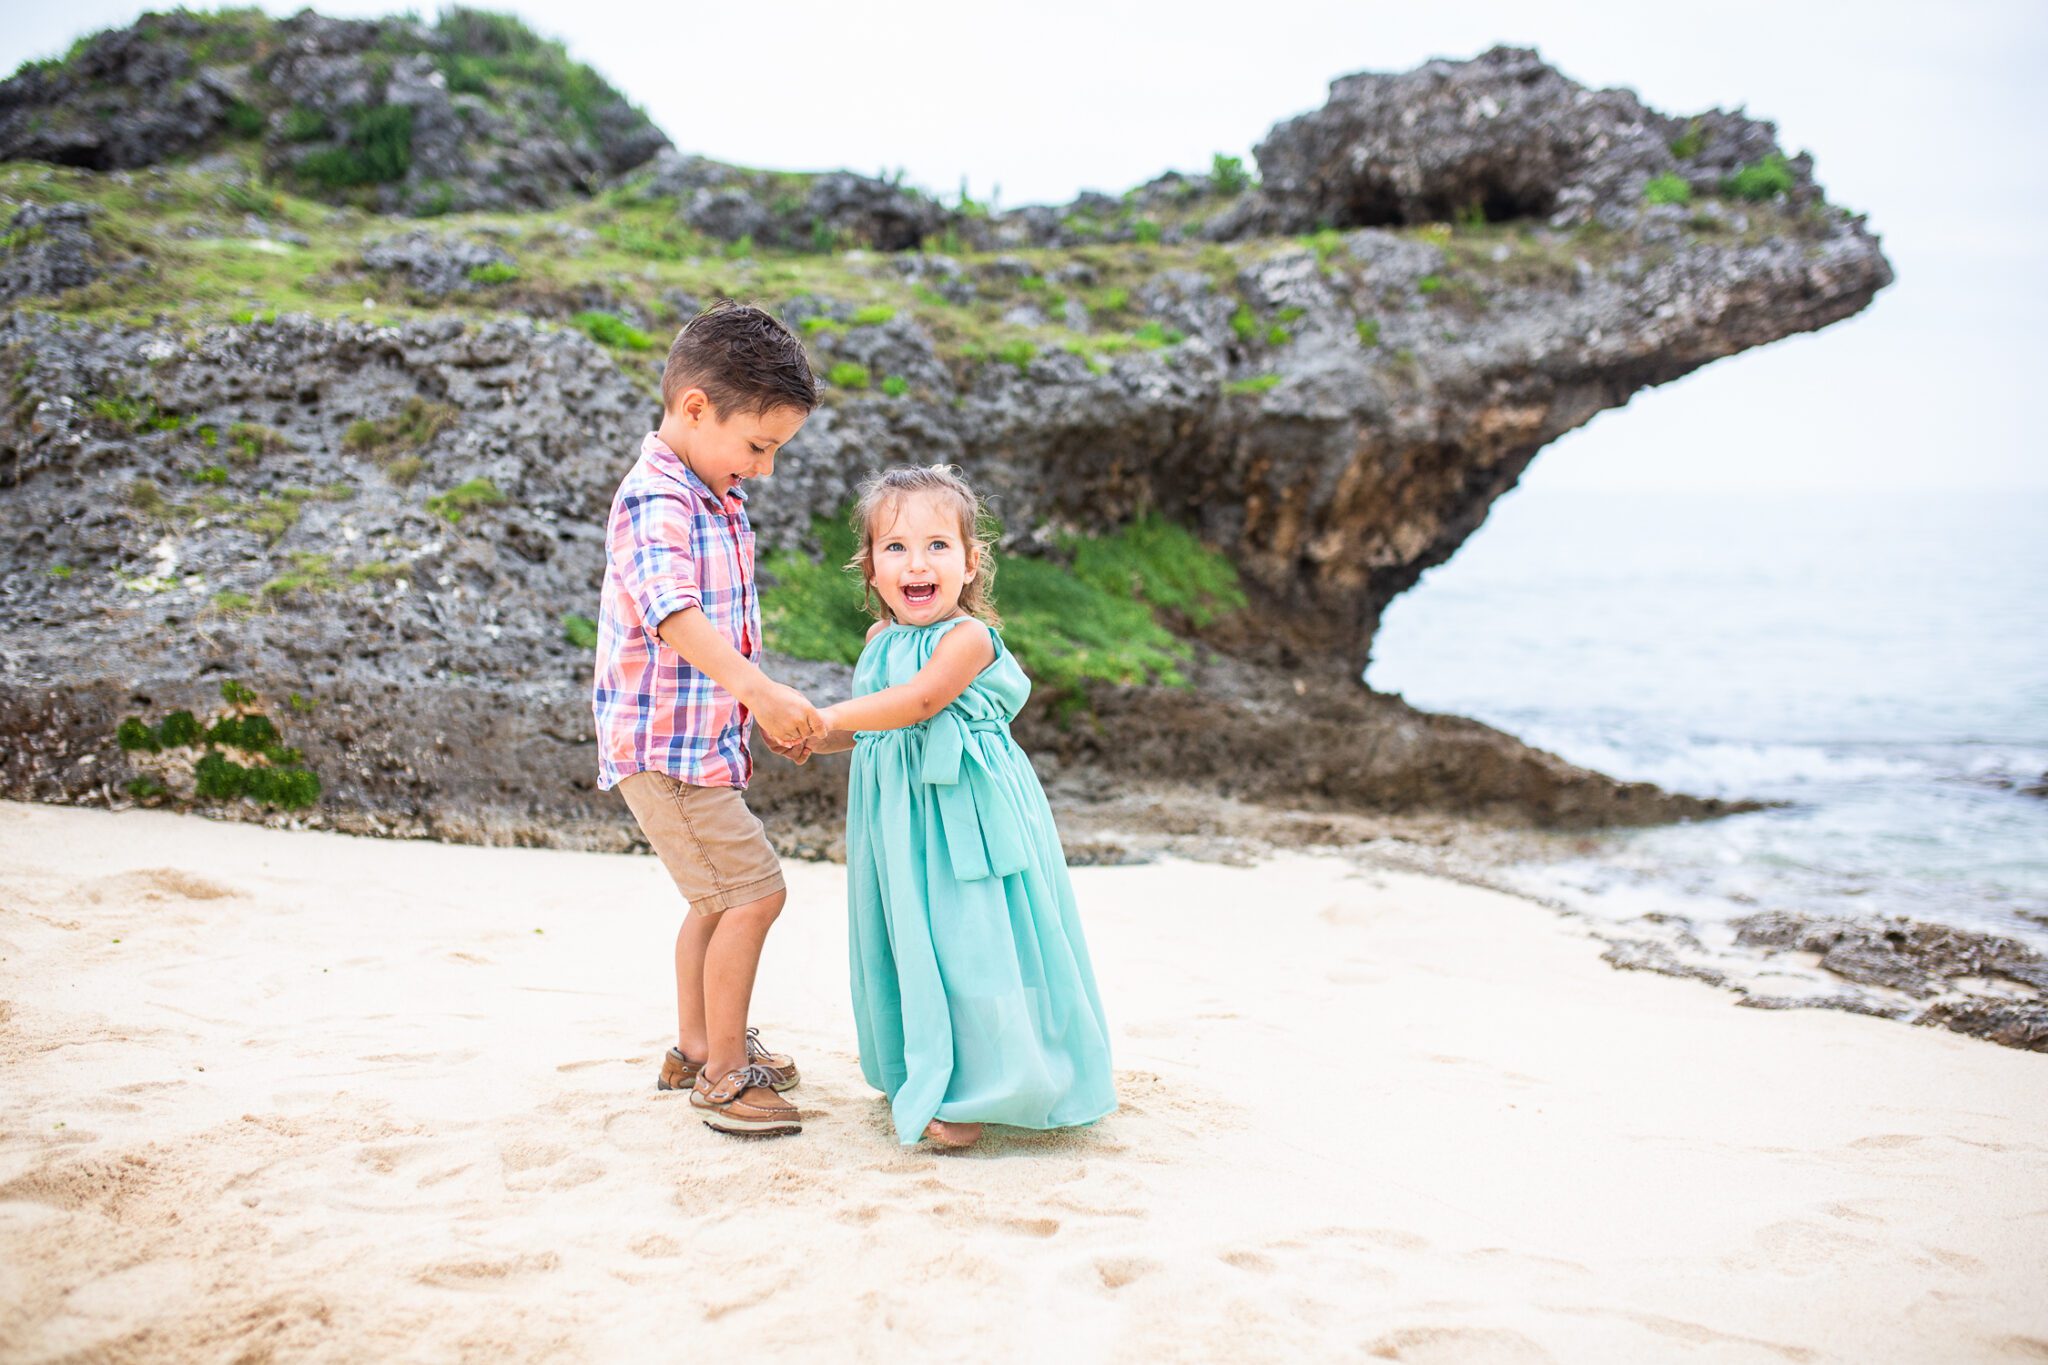 Beach Family Photos With Little Kids in Oahu Hawaii by alison bell, photographer